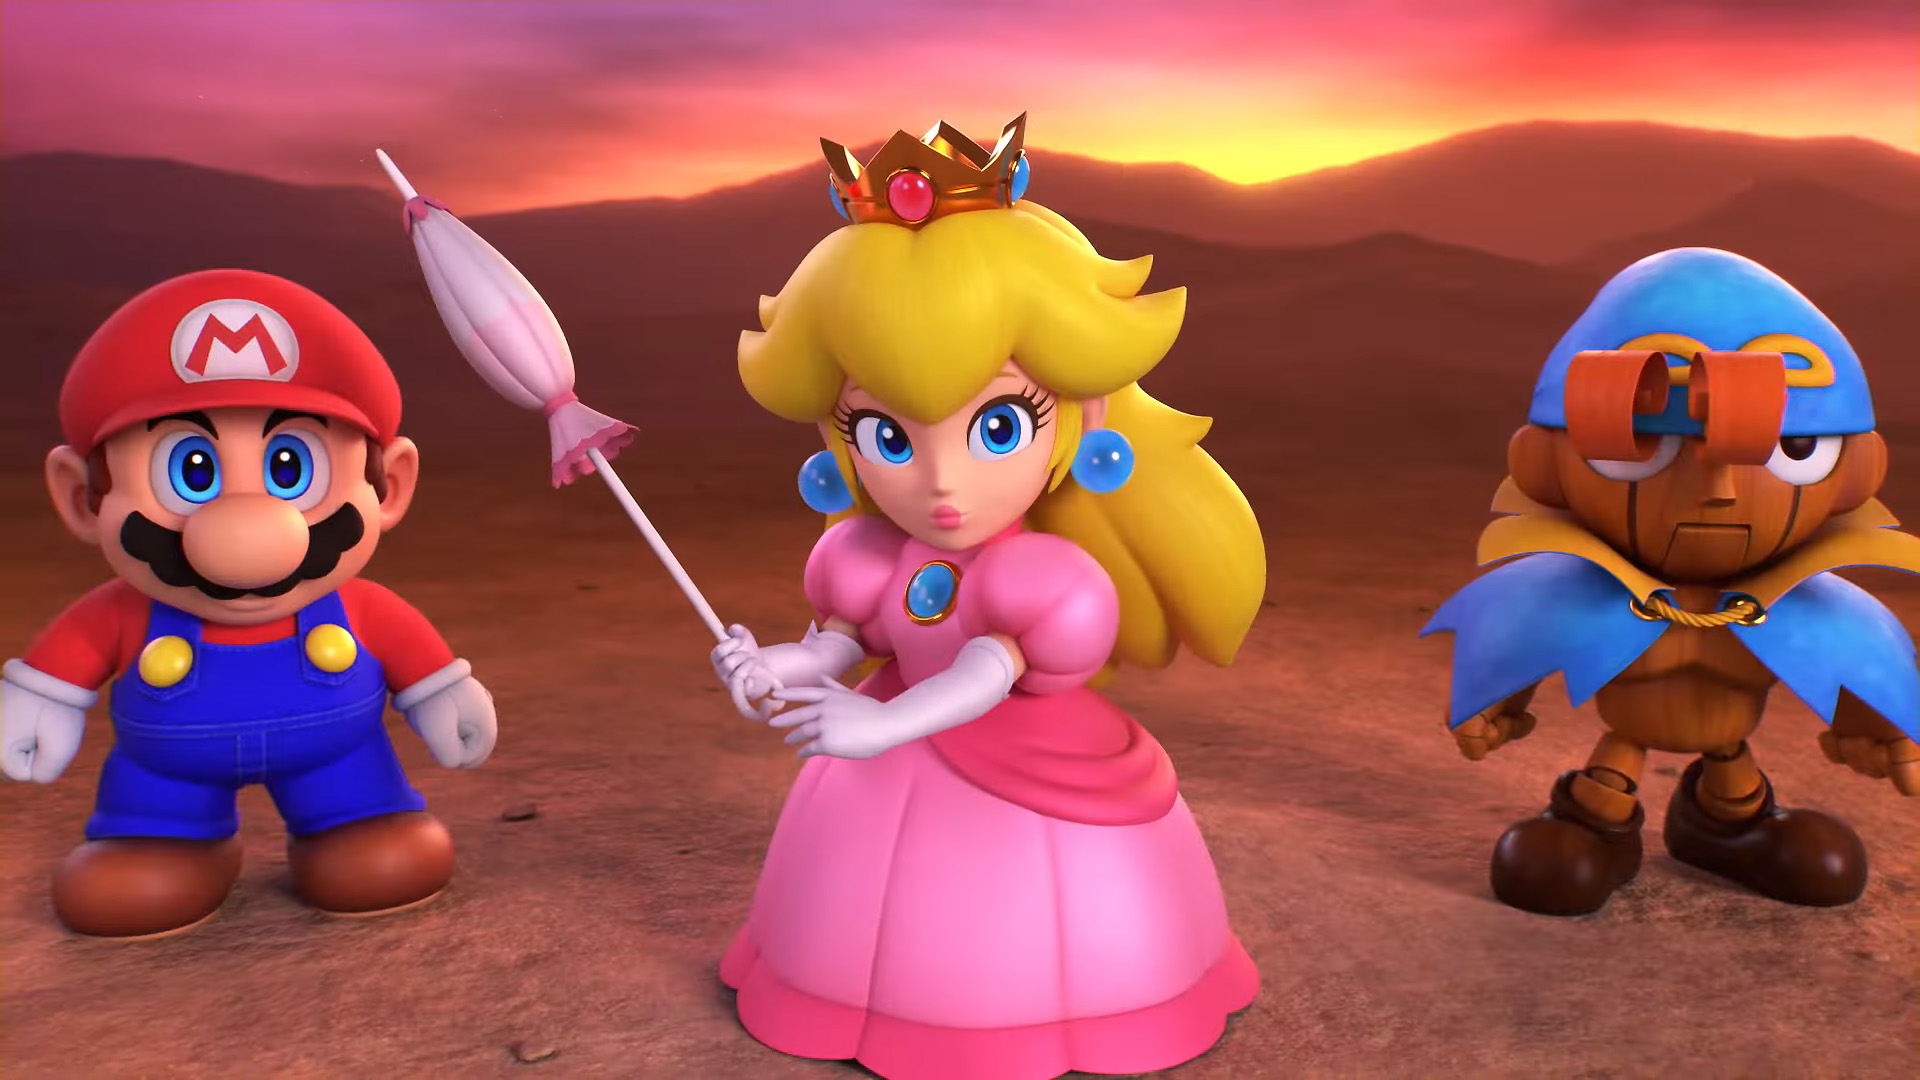 Mario and Peach in the upcoming Super Mario RPG remake